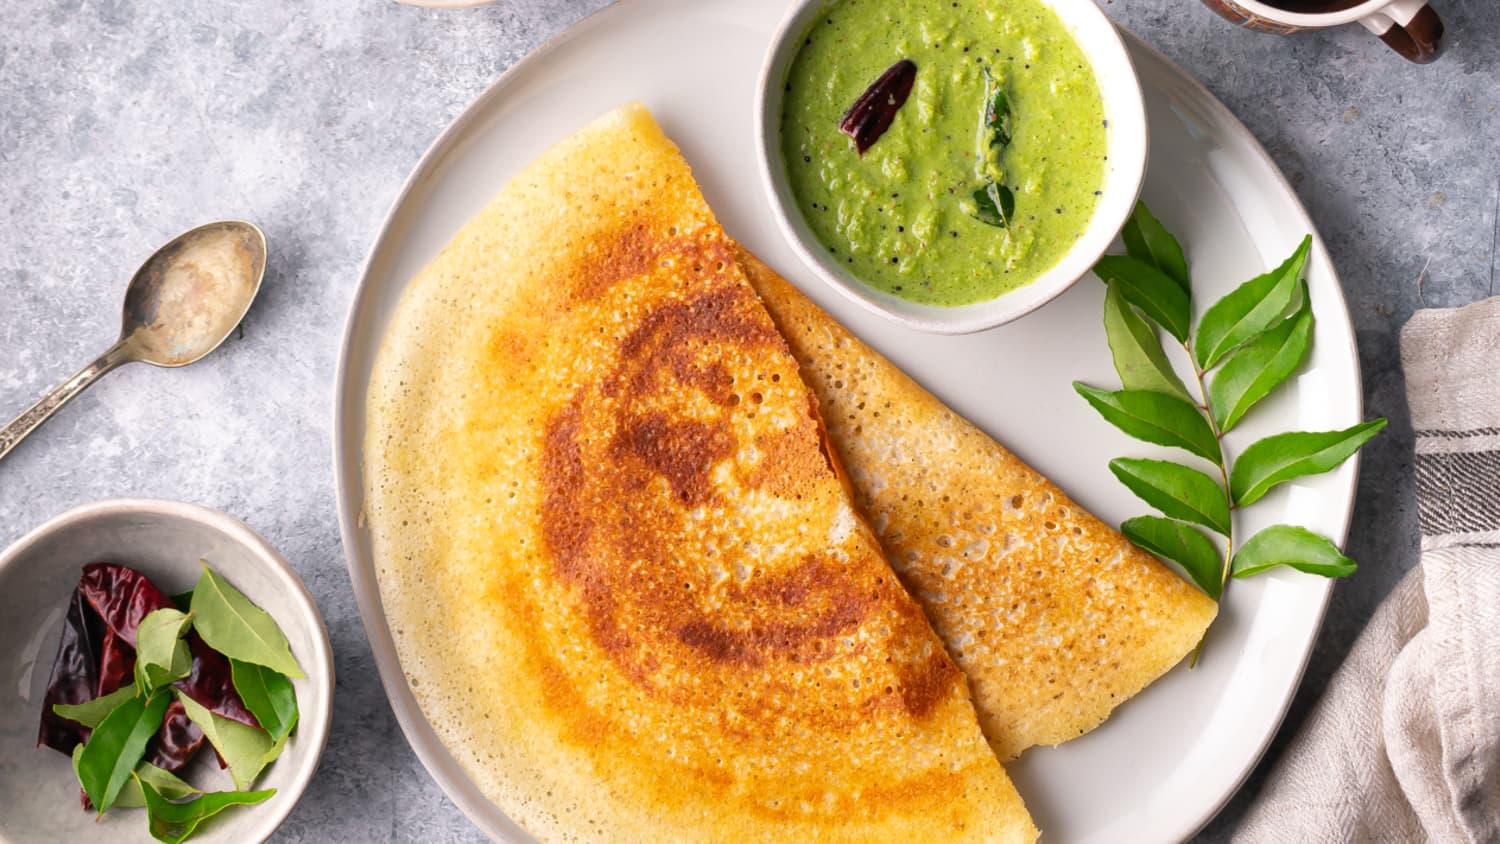 A Step-by-Step Guide to Making the Very Best Dosa from Scratch